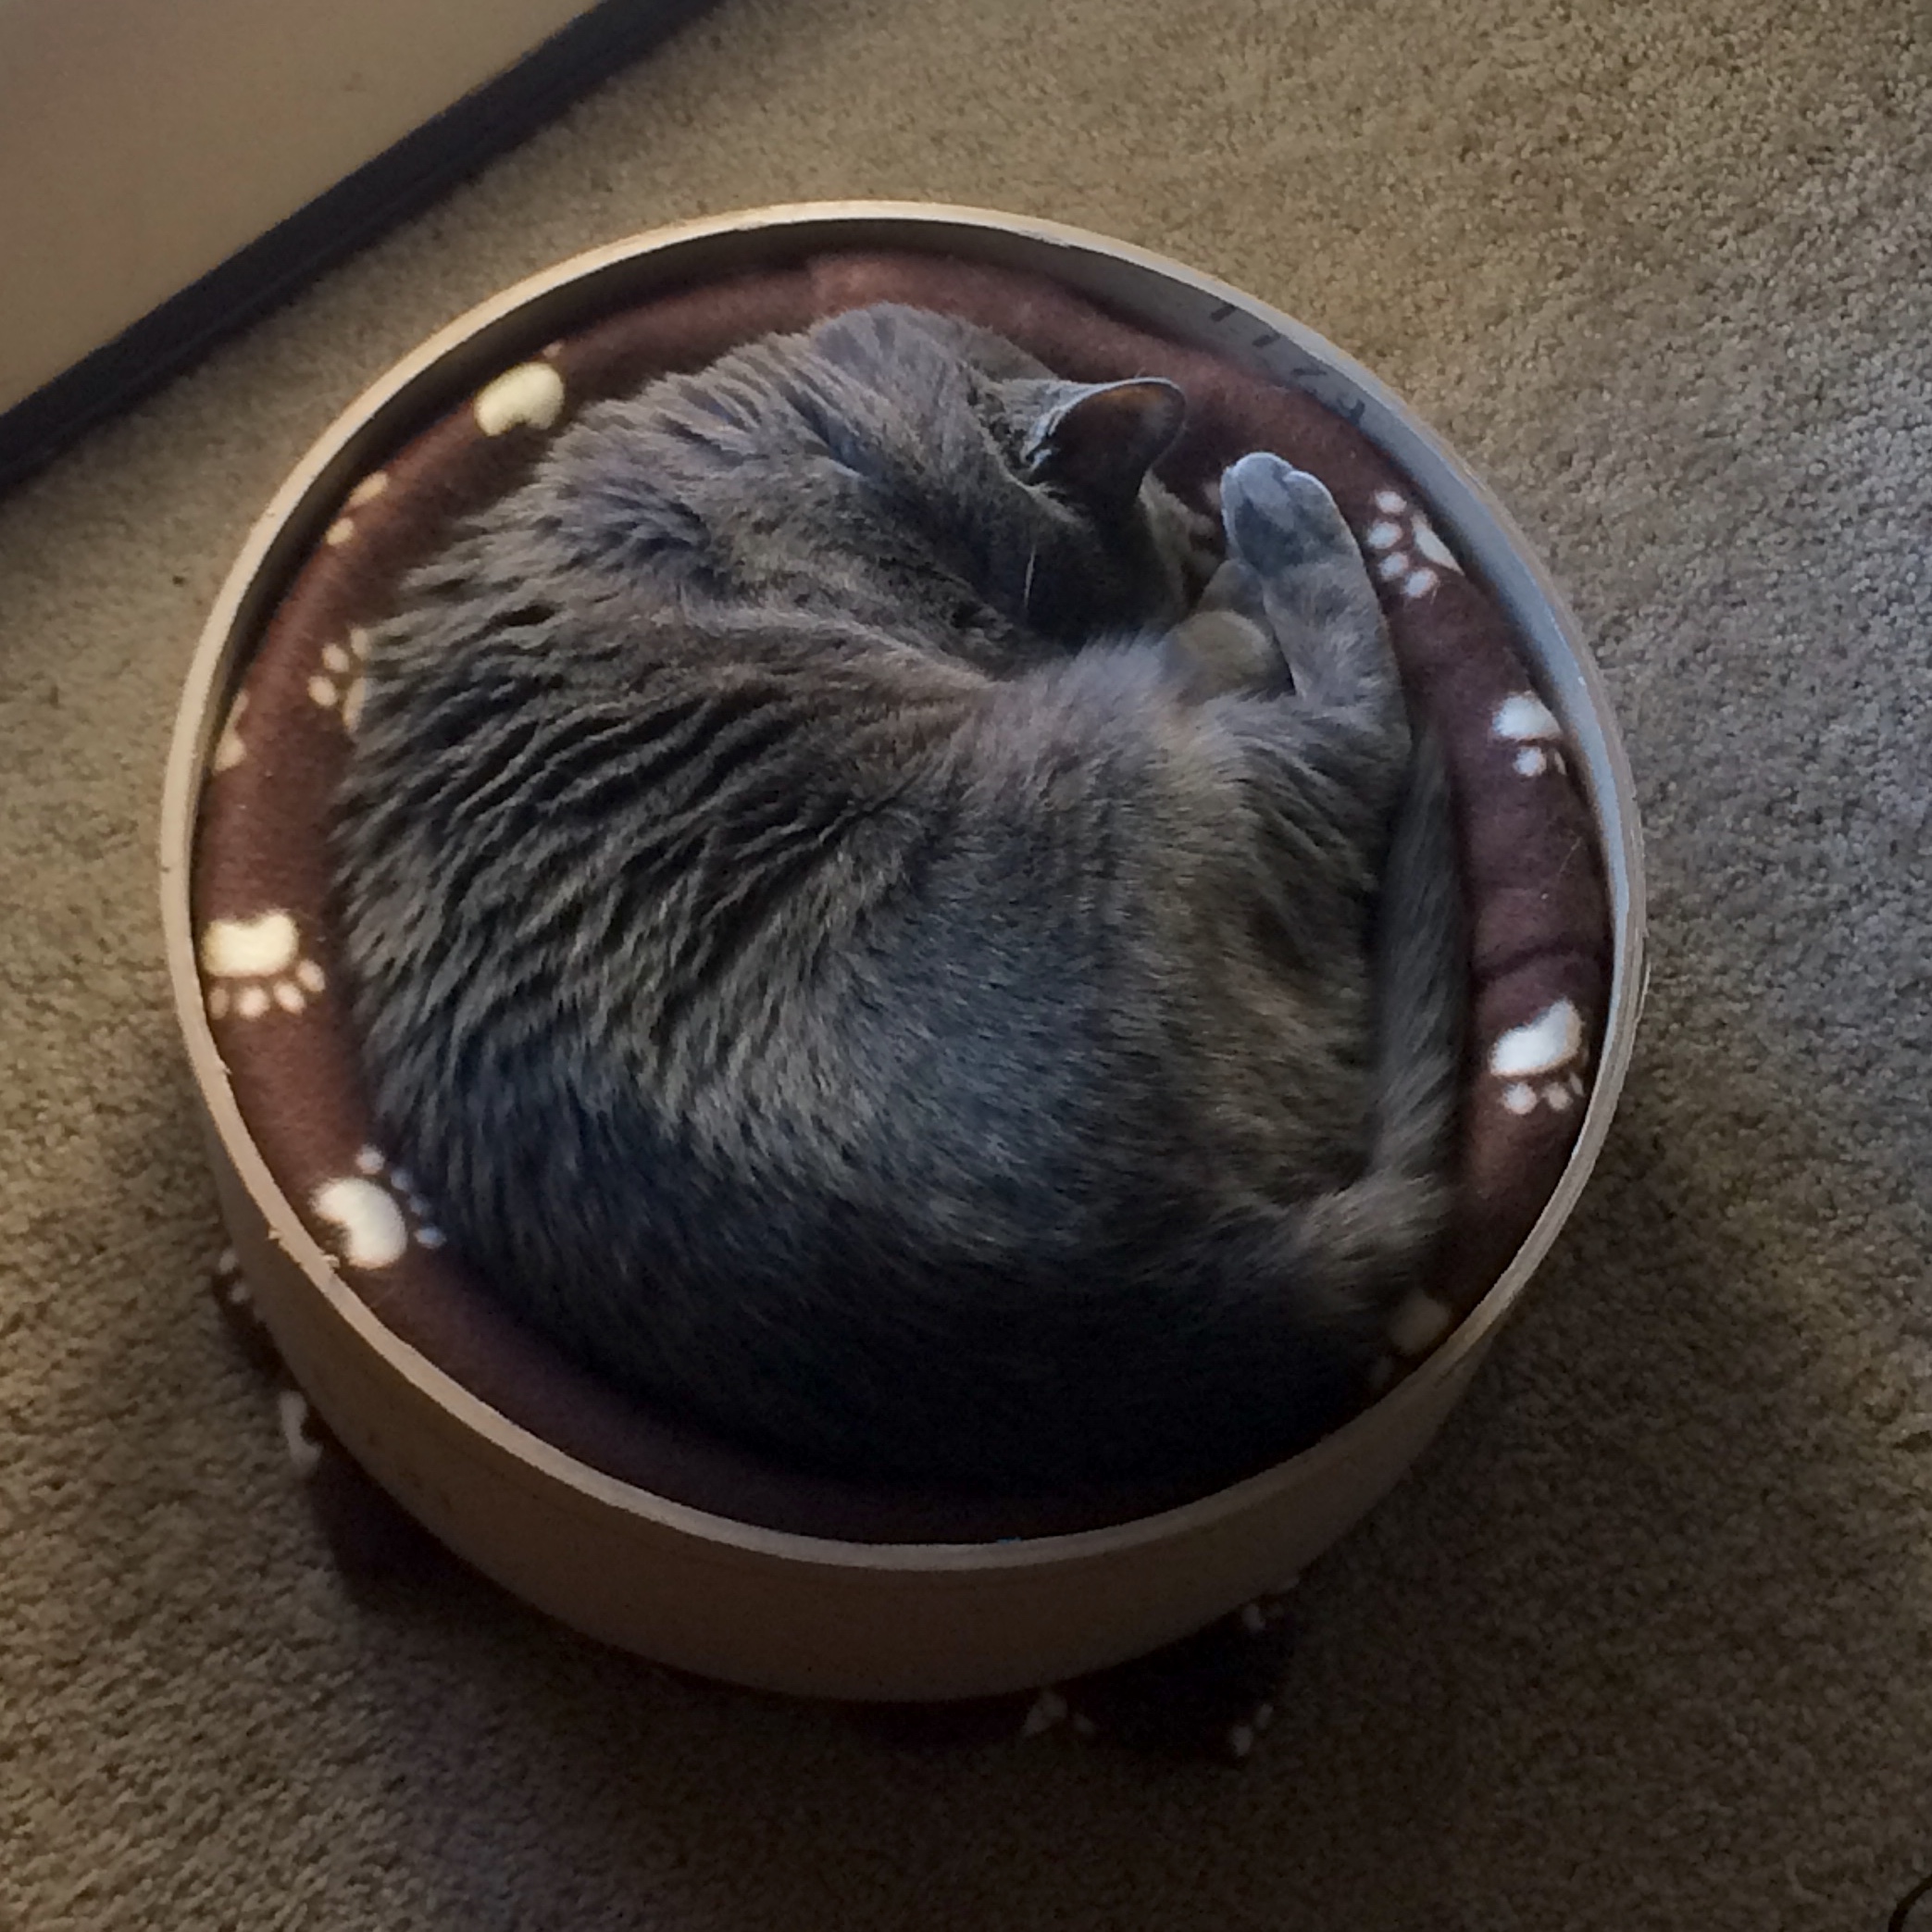 A gray tortie cat curled up inside a round cat bed.